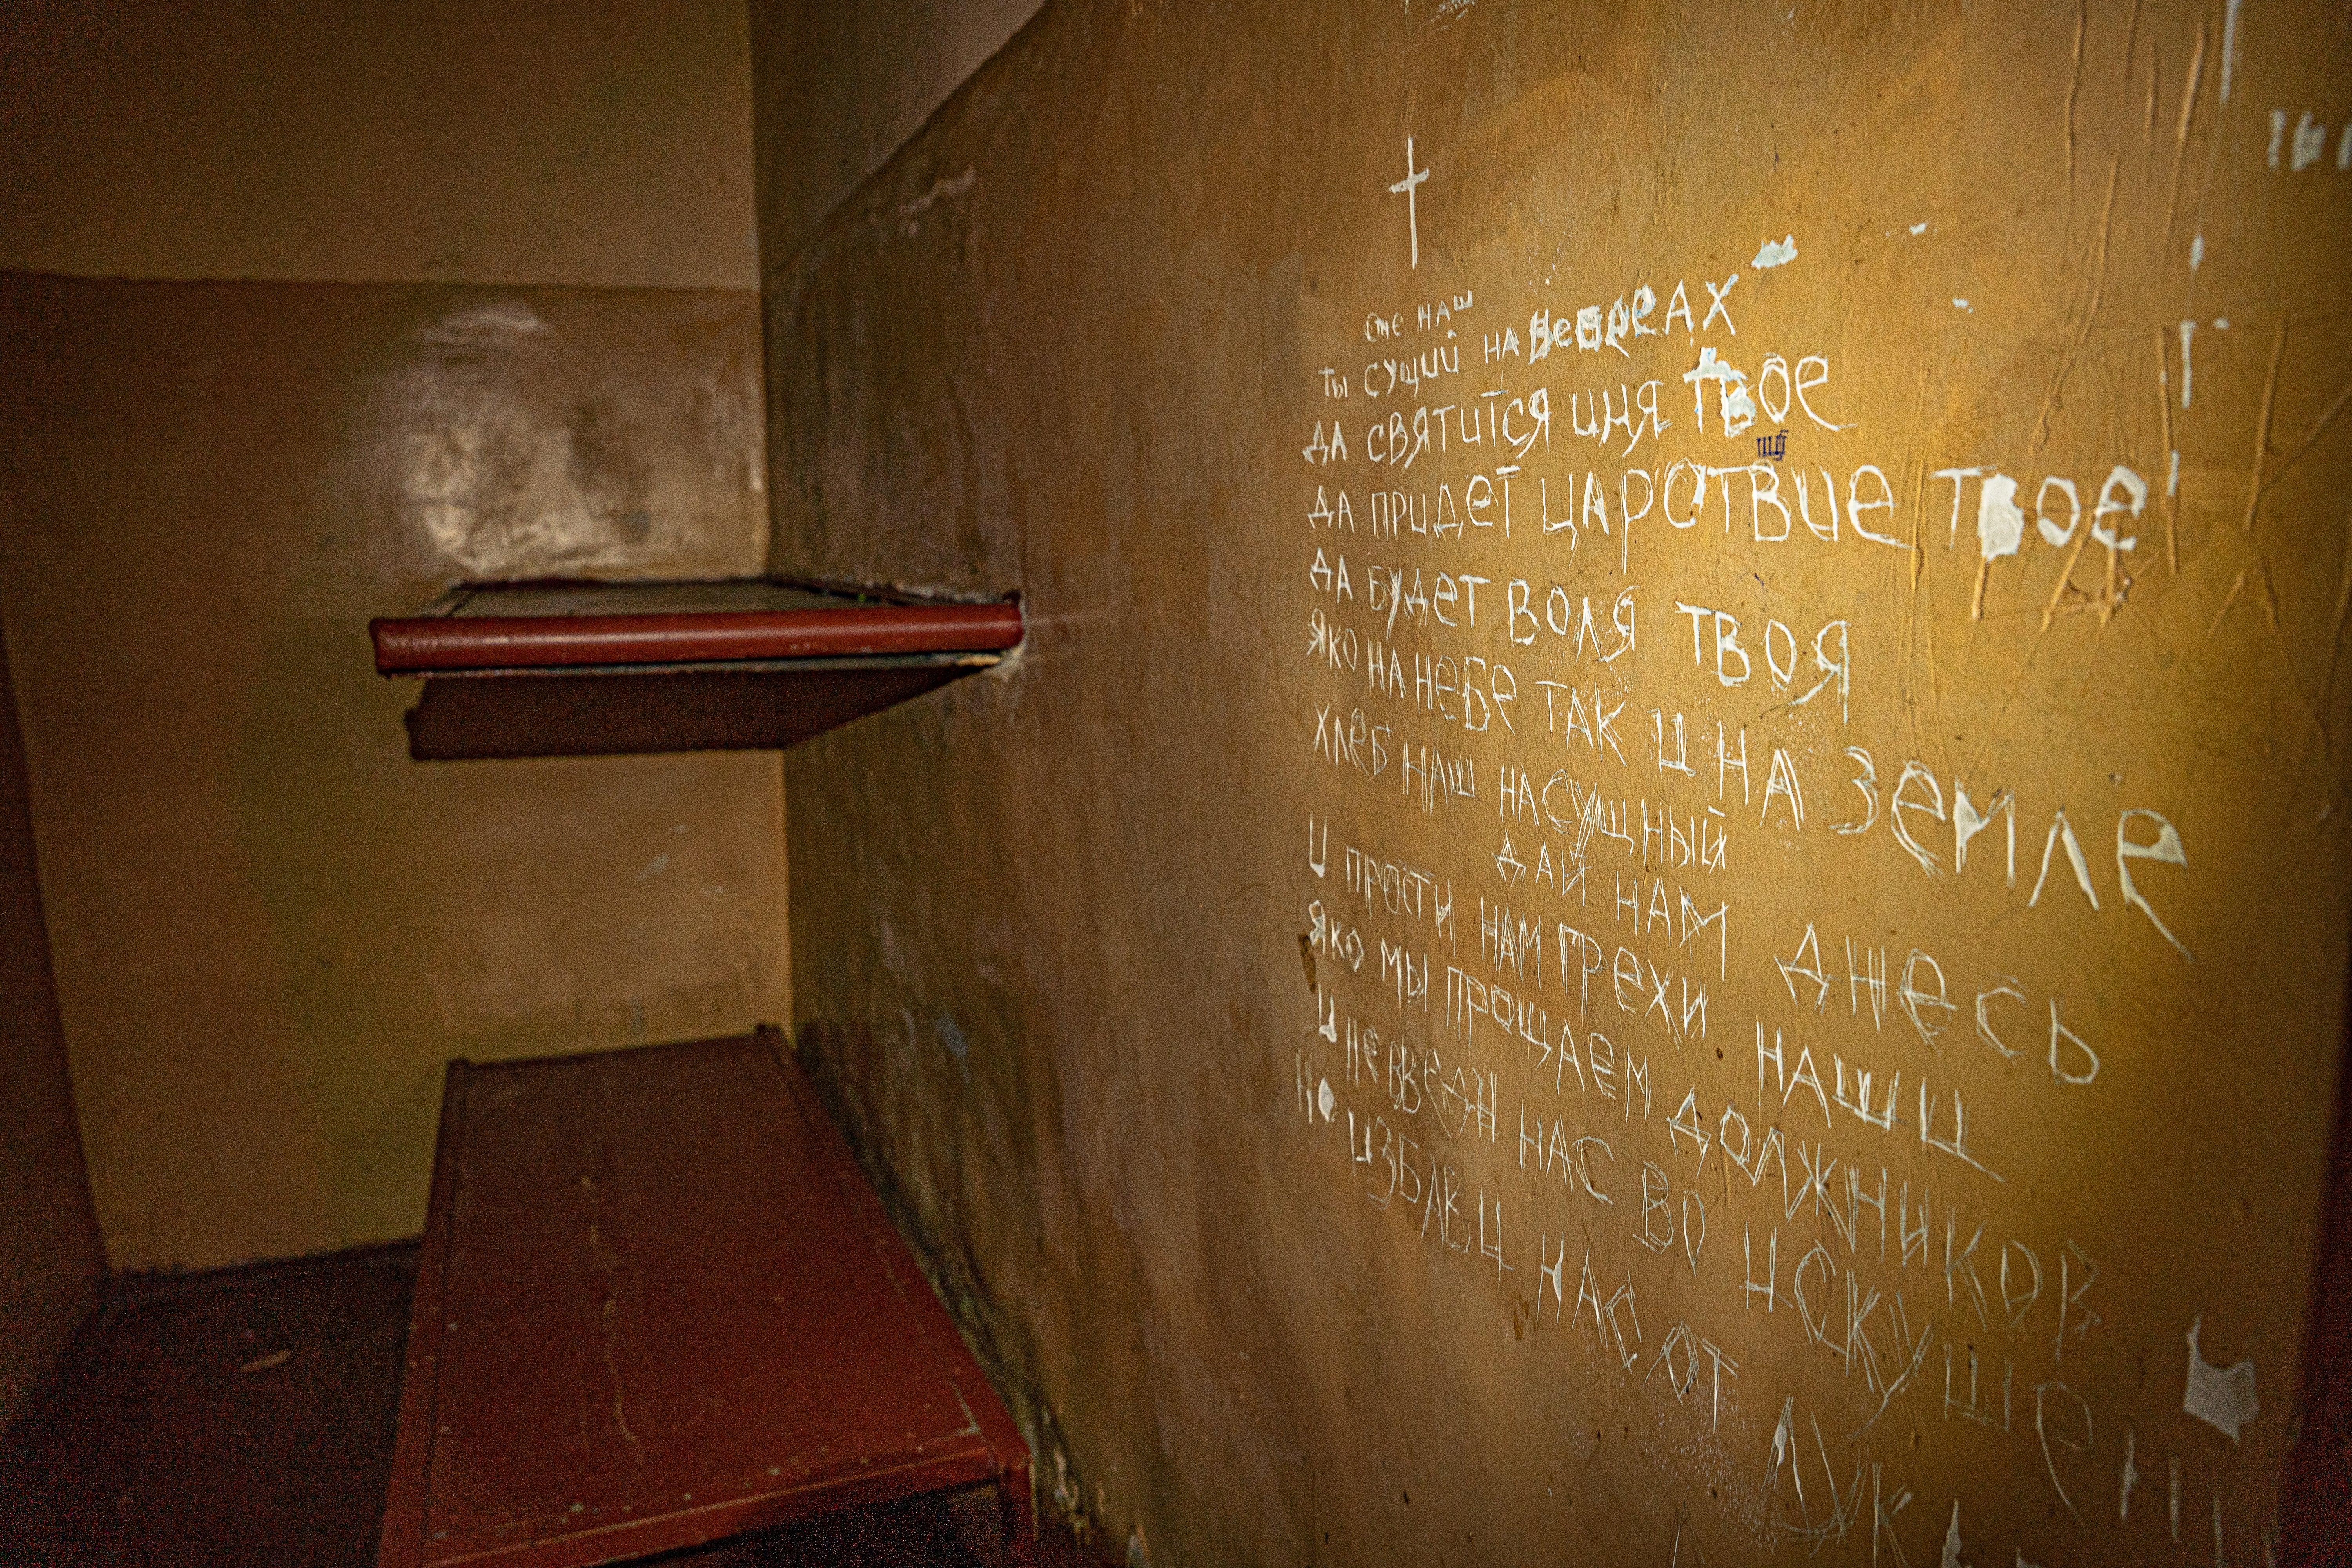 The Lord’s Prayer in Russian is etched into the wall of Oleksander’s tiny cell where he was held and tortured for weeks in Balakiya